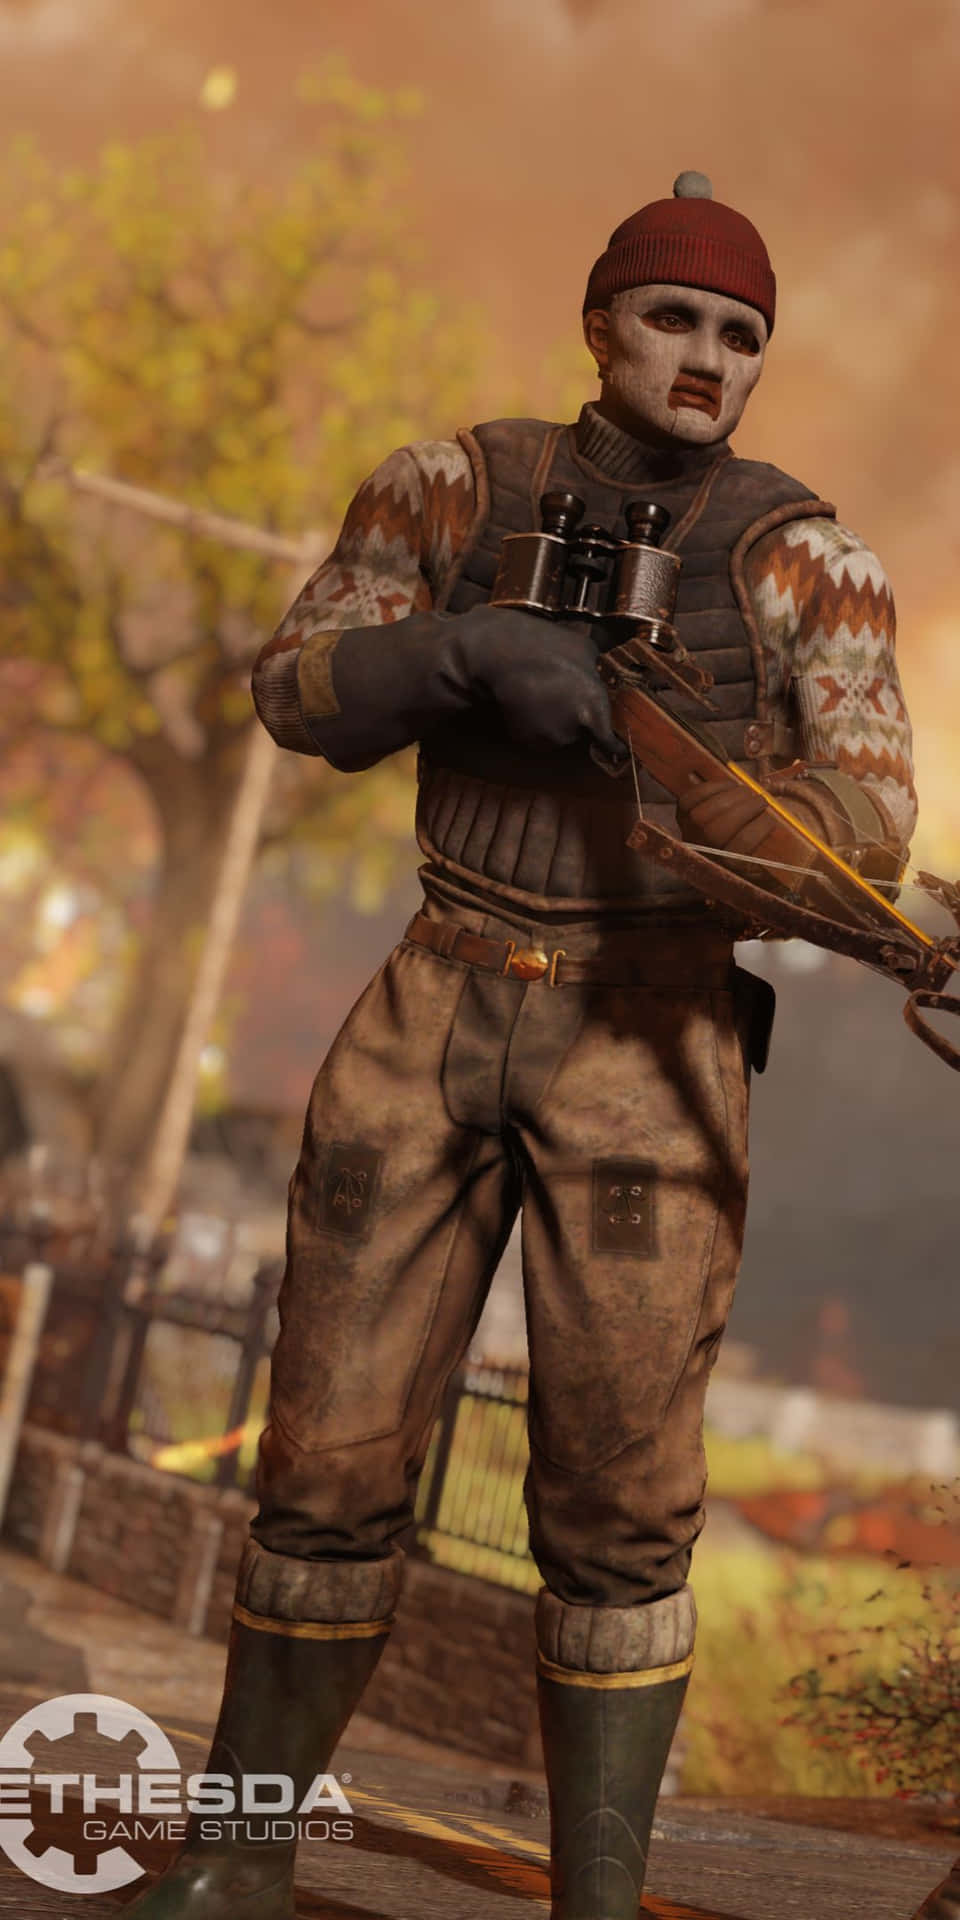 Feel the intensity of the post-apocalyptic world with Pixel 3 and Fallout 76